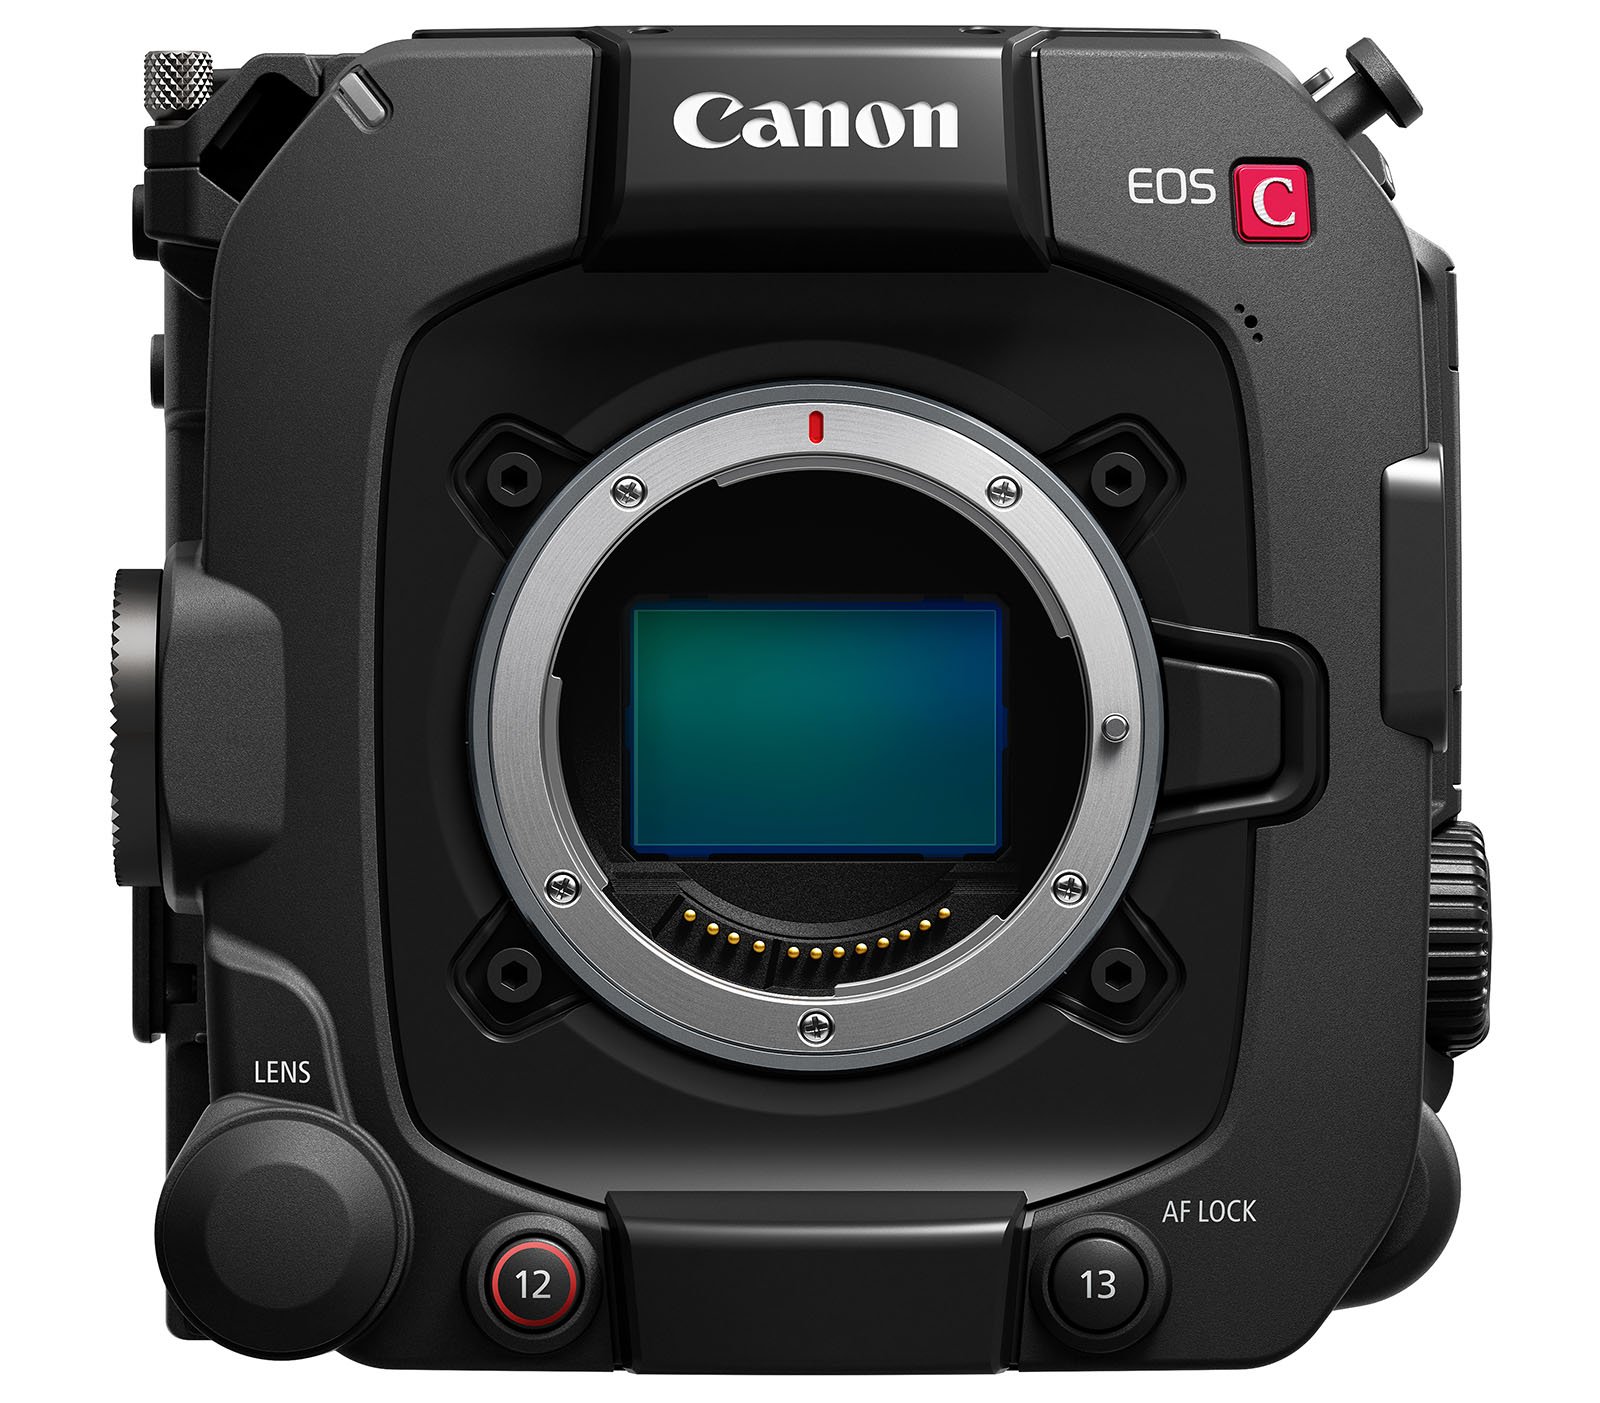 A Canon EOS C camera showing its front view. The lens is not attached, exposing the sensor inside. The camera body is black with various buttons and dials, including lens and autofocus lock buttons, and a red 'C' at the top.